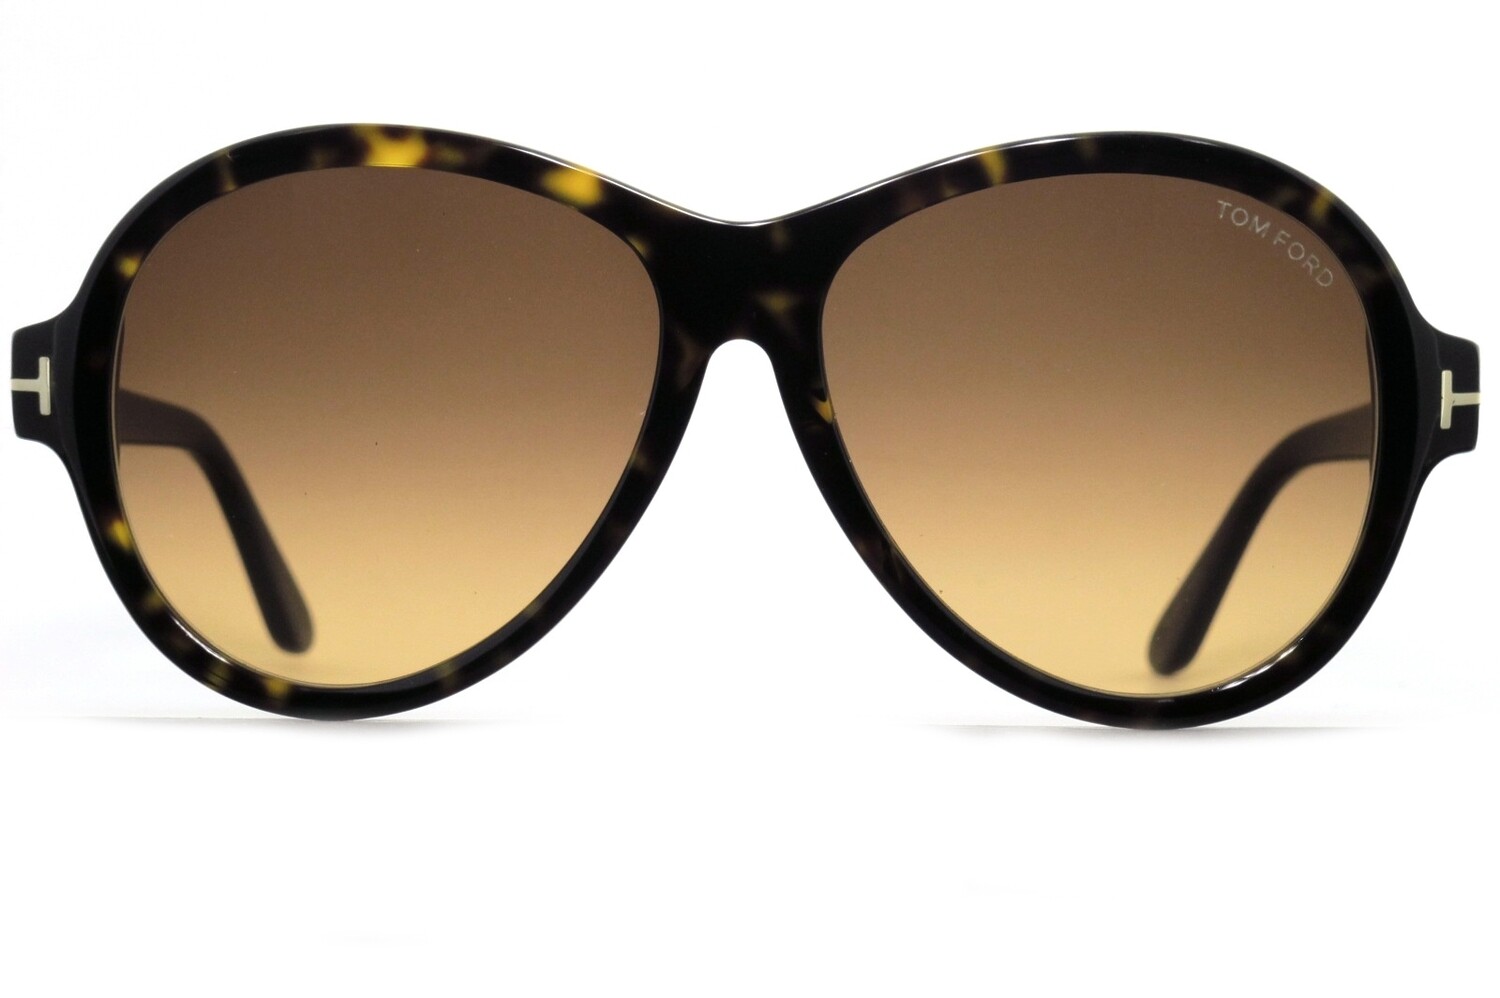 Camryn TF1033 by Tom Ford